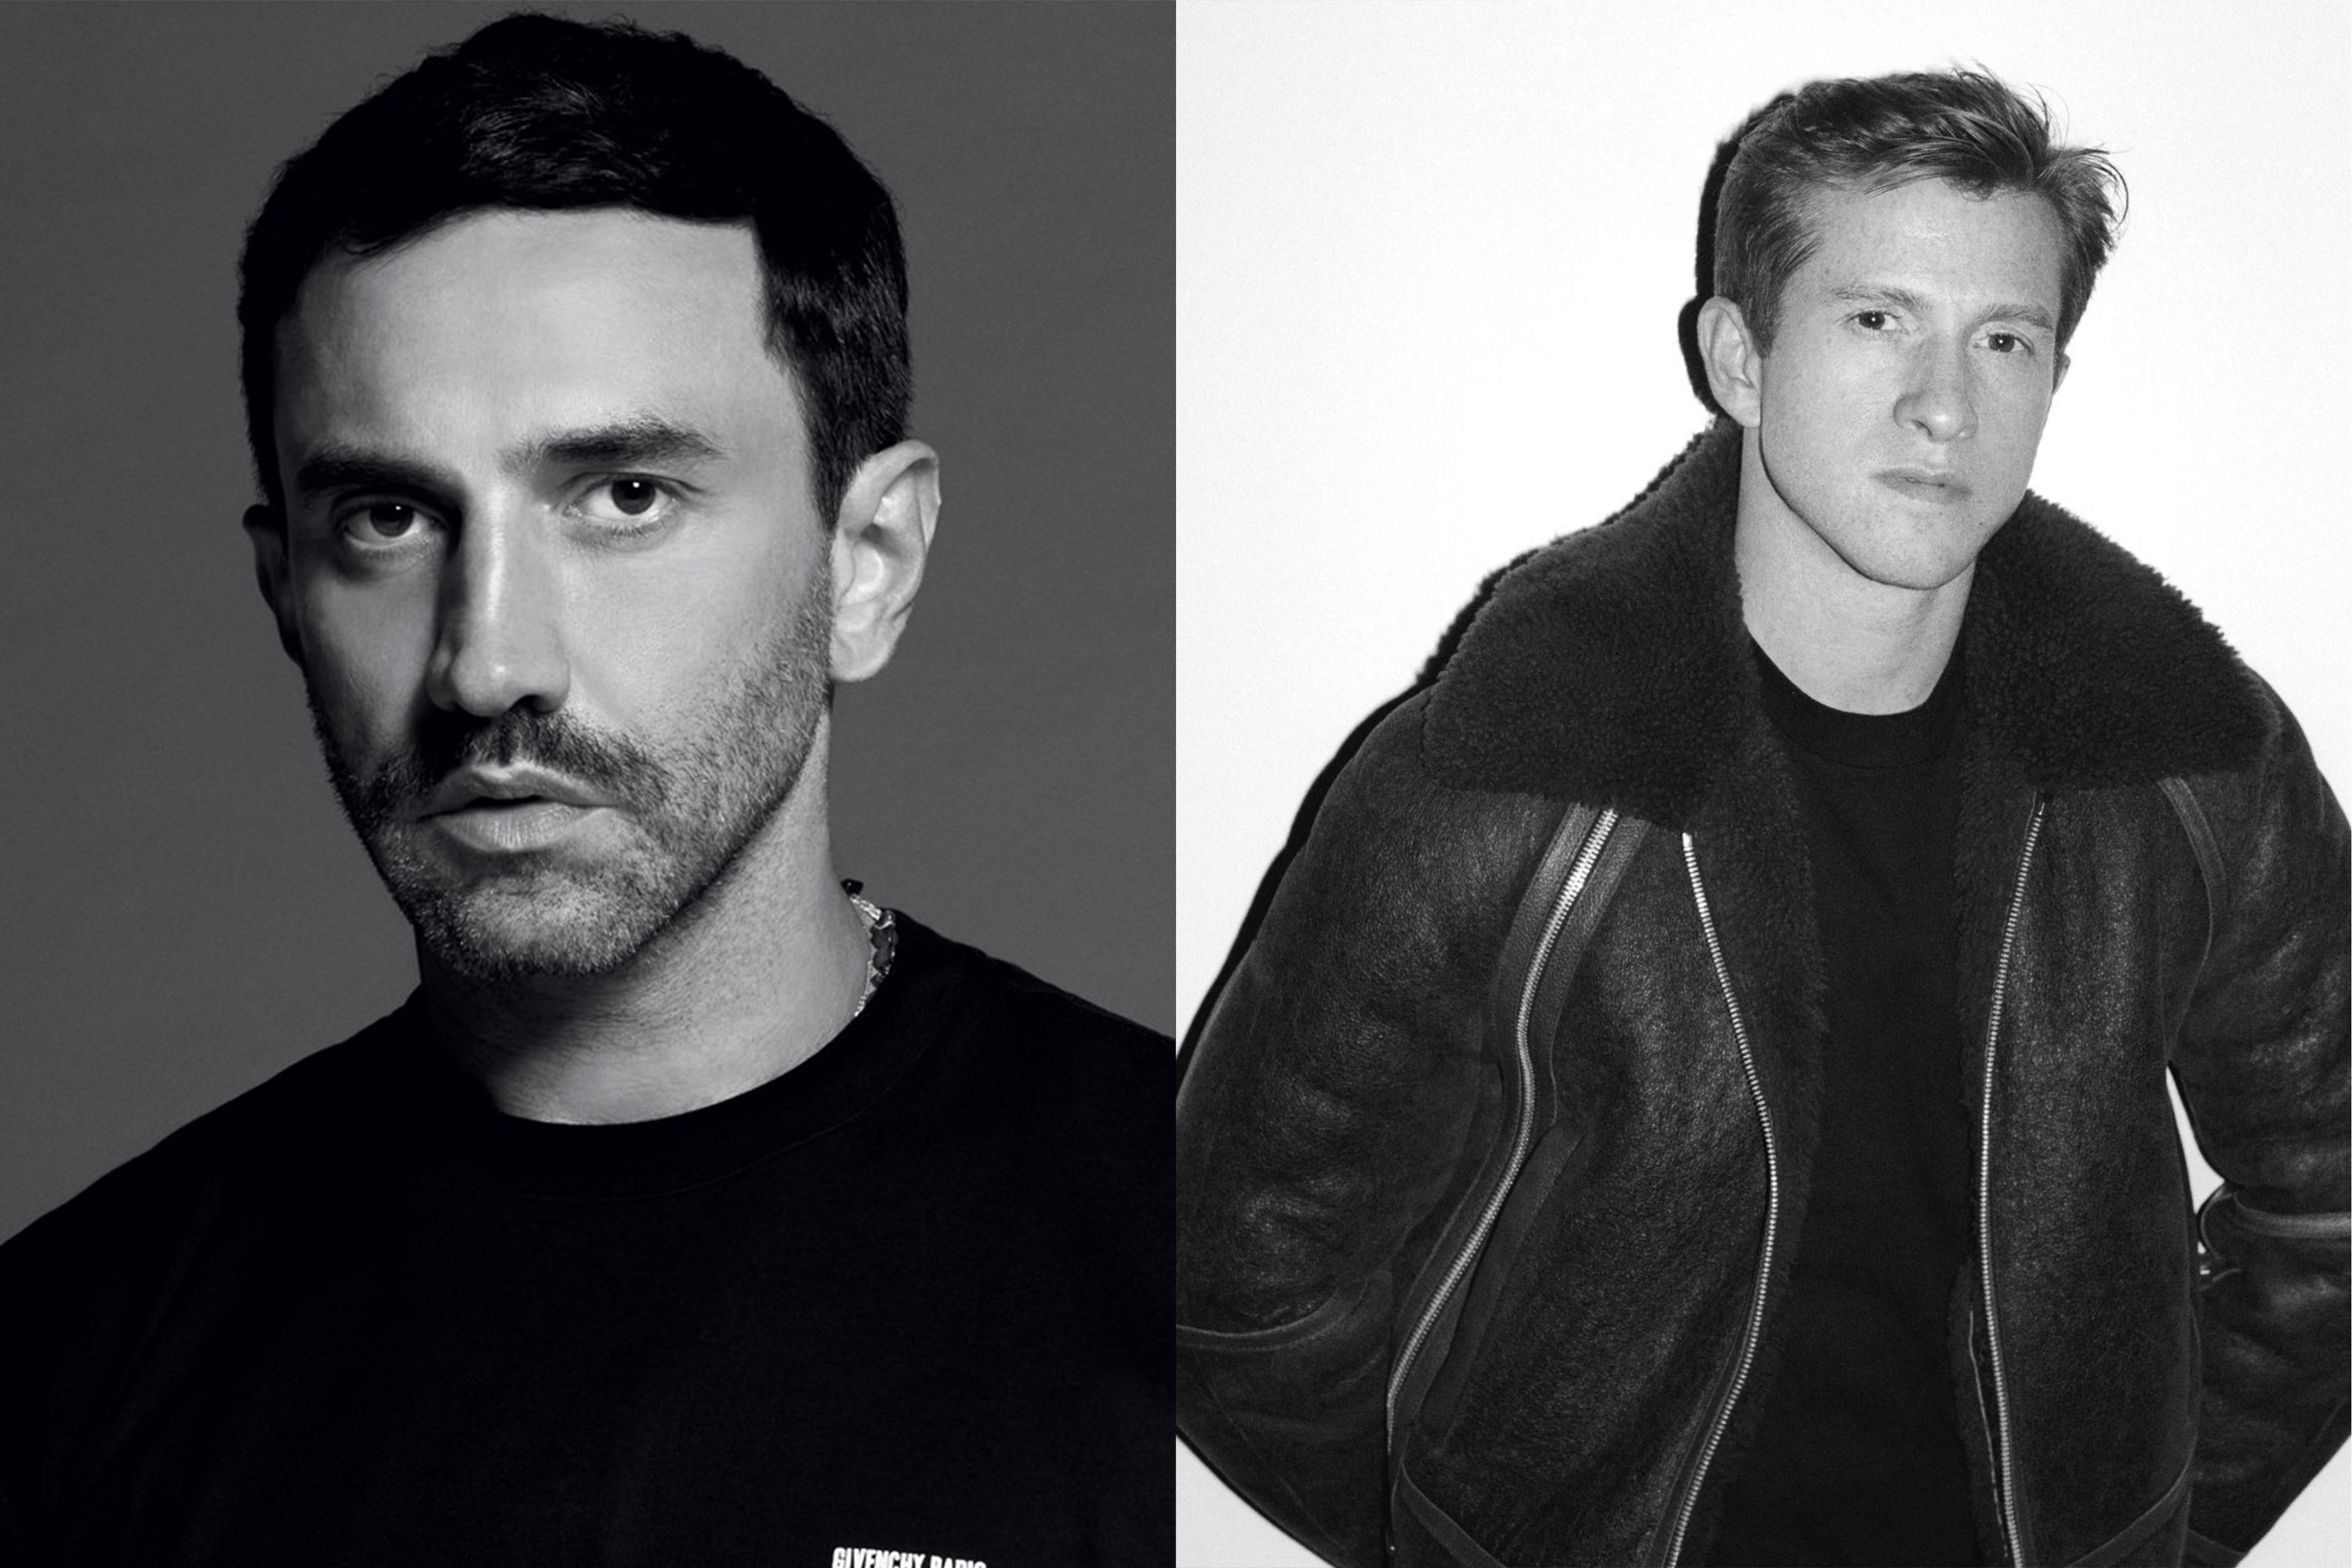 Riccardo Tisci Steps Down at Burberry – Daniel Lee Steps Up | AnOther